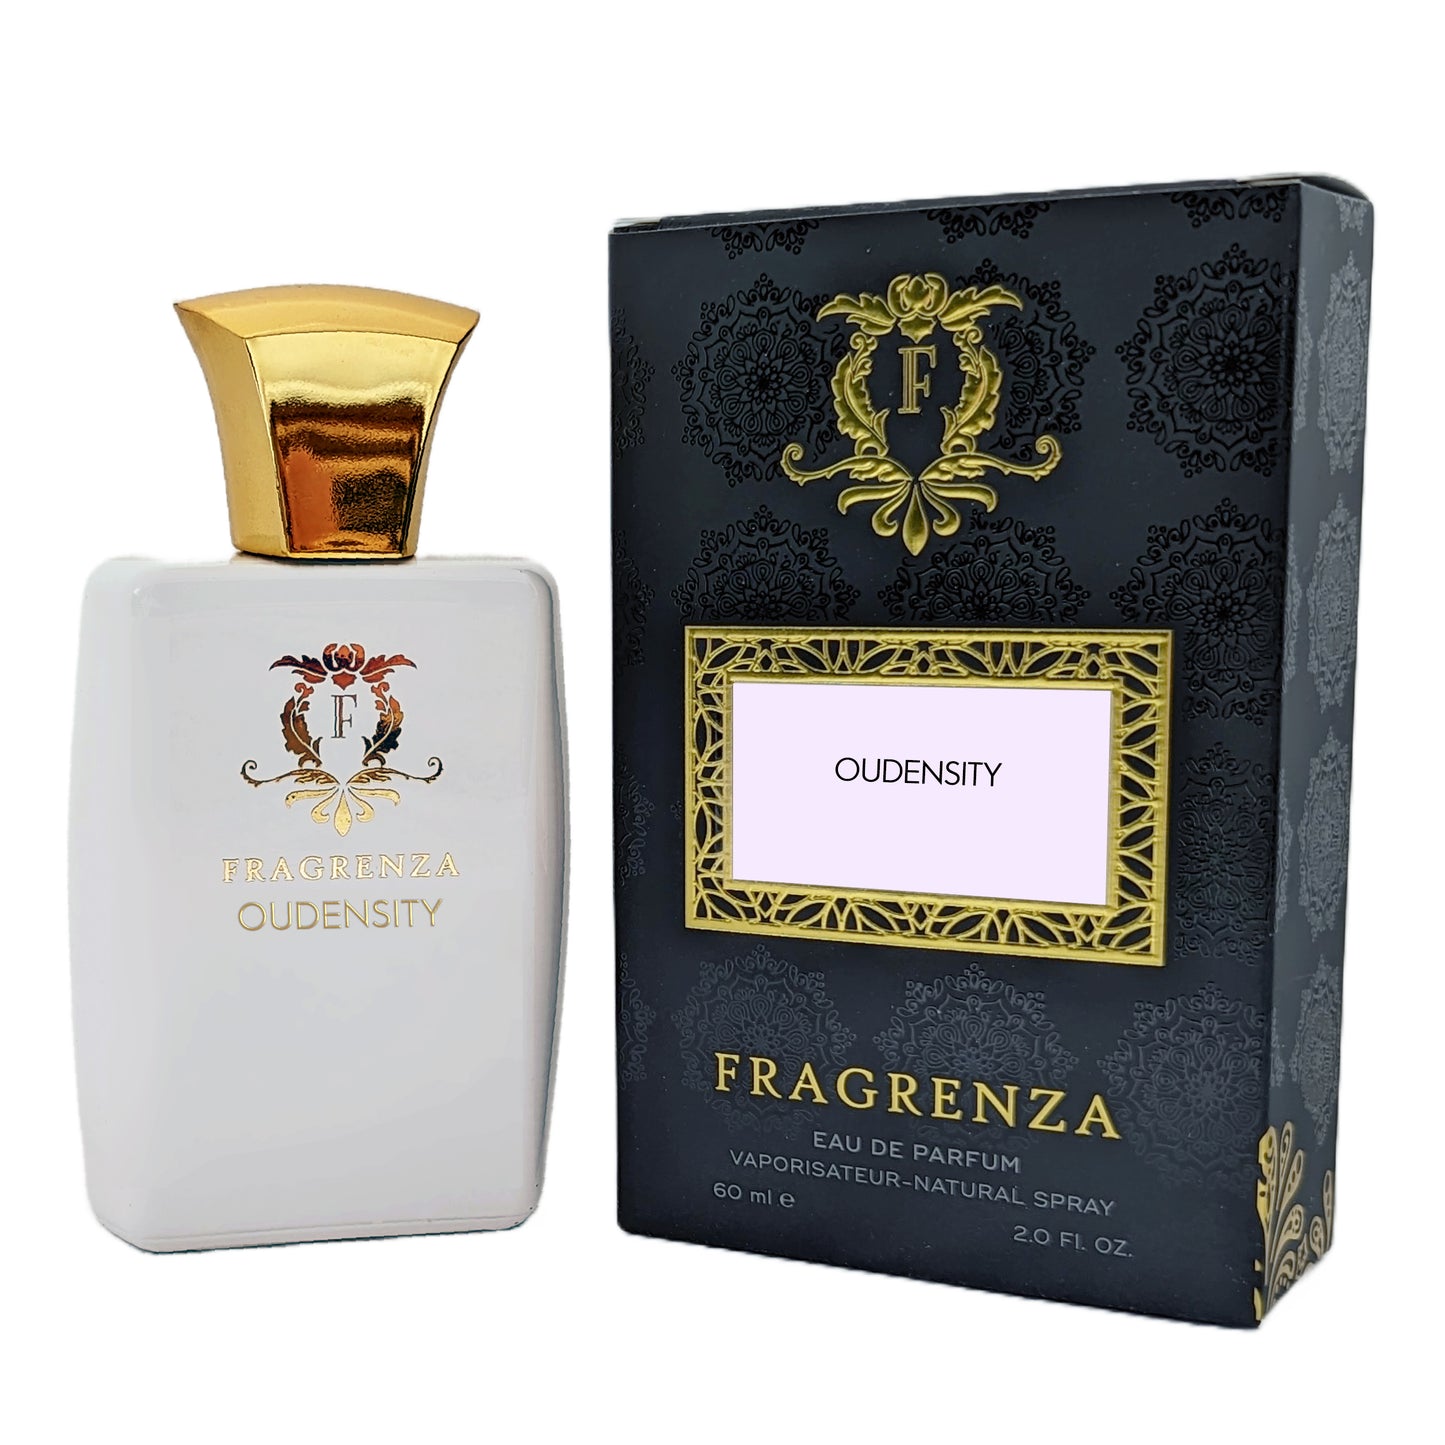 Initio Parfums Oud for Greatness dupe